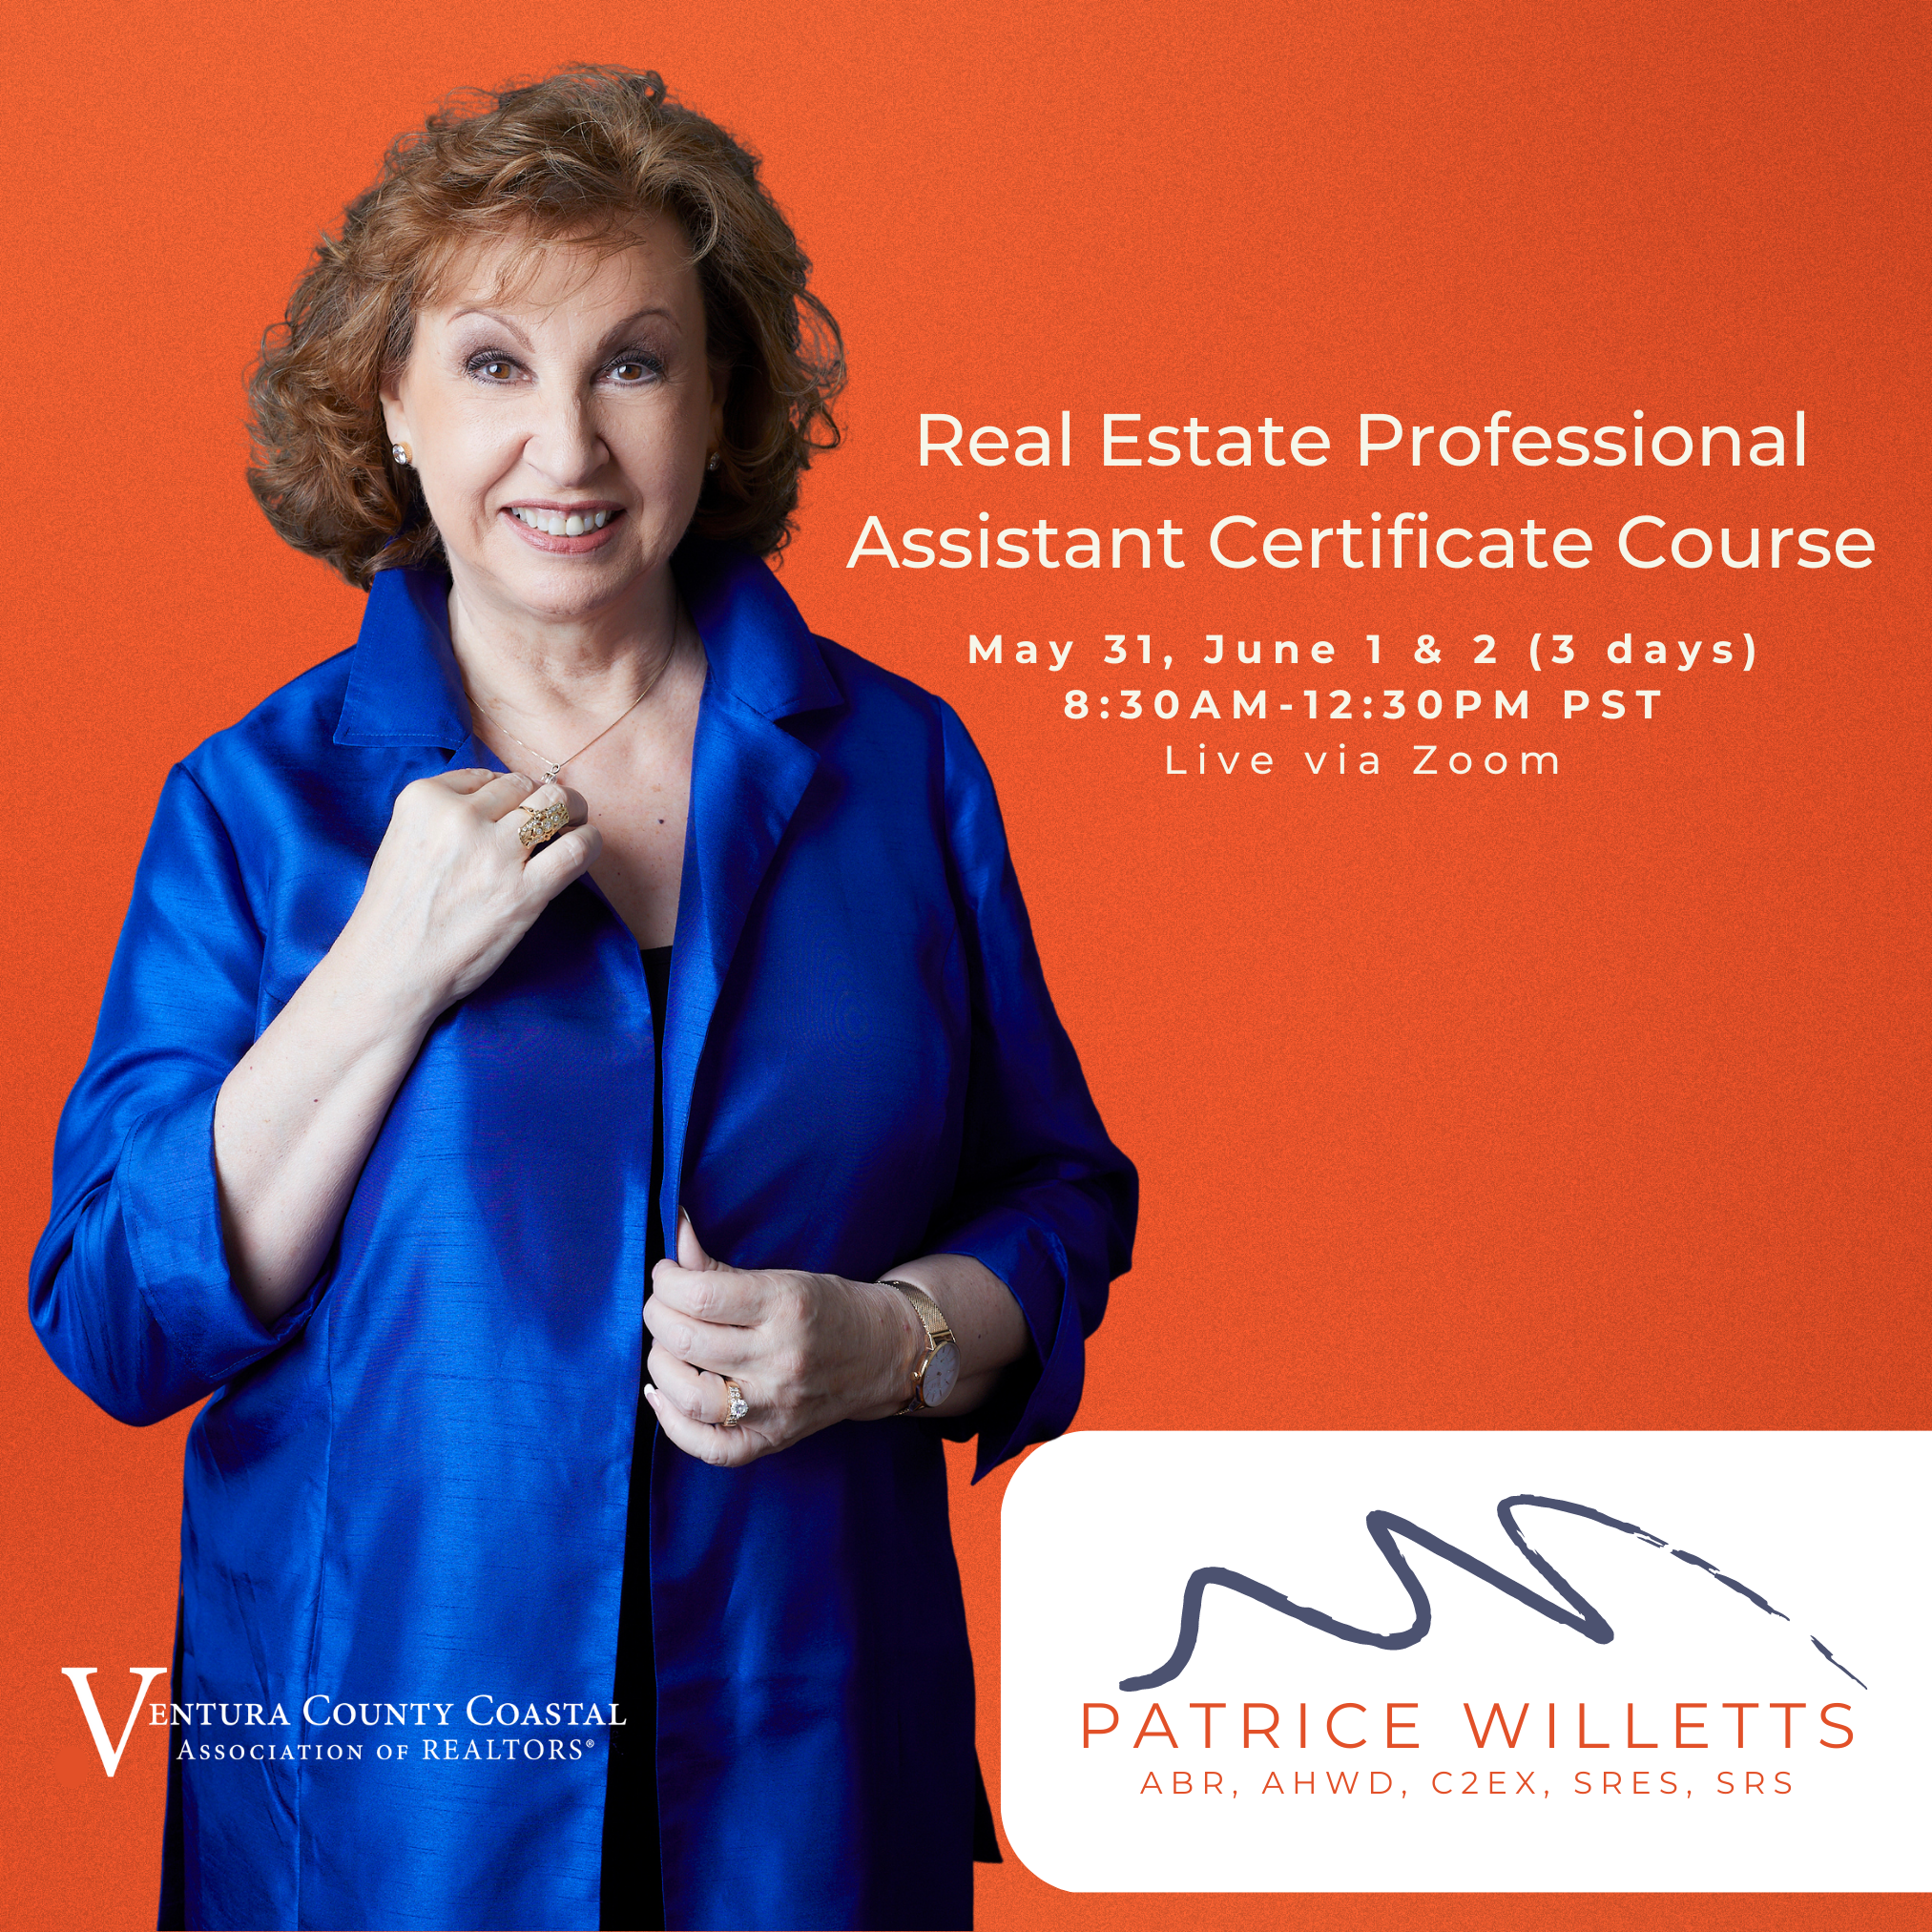 Real Estate Professional Assistant Certificate Course